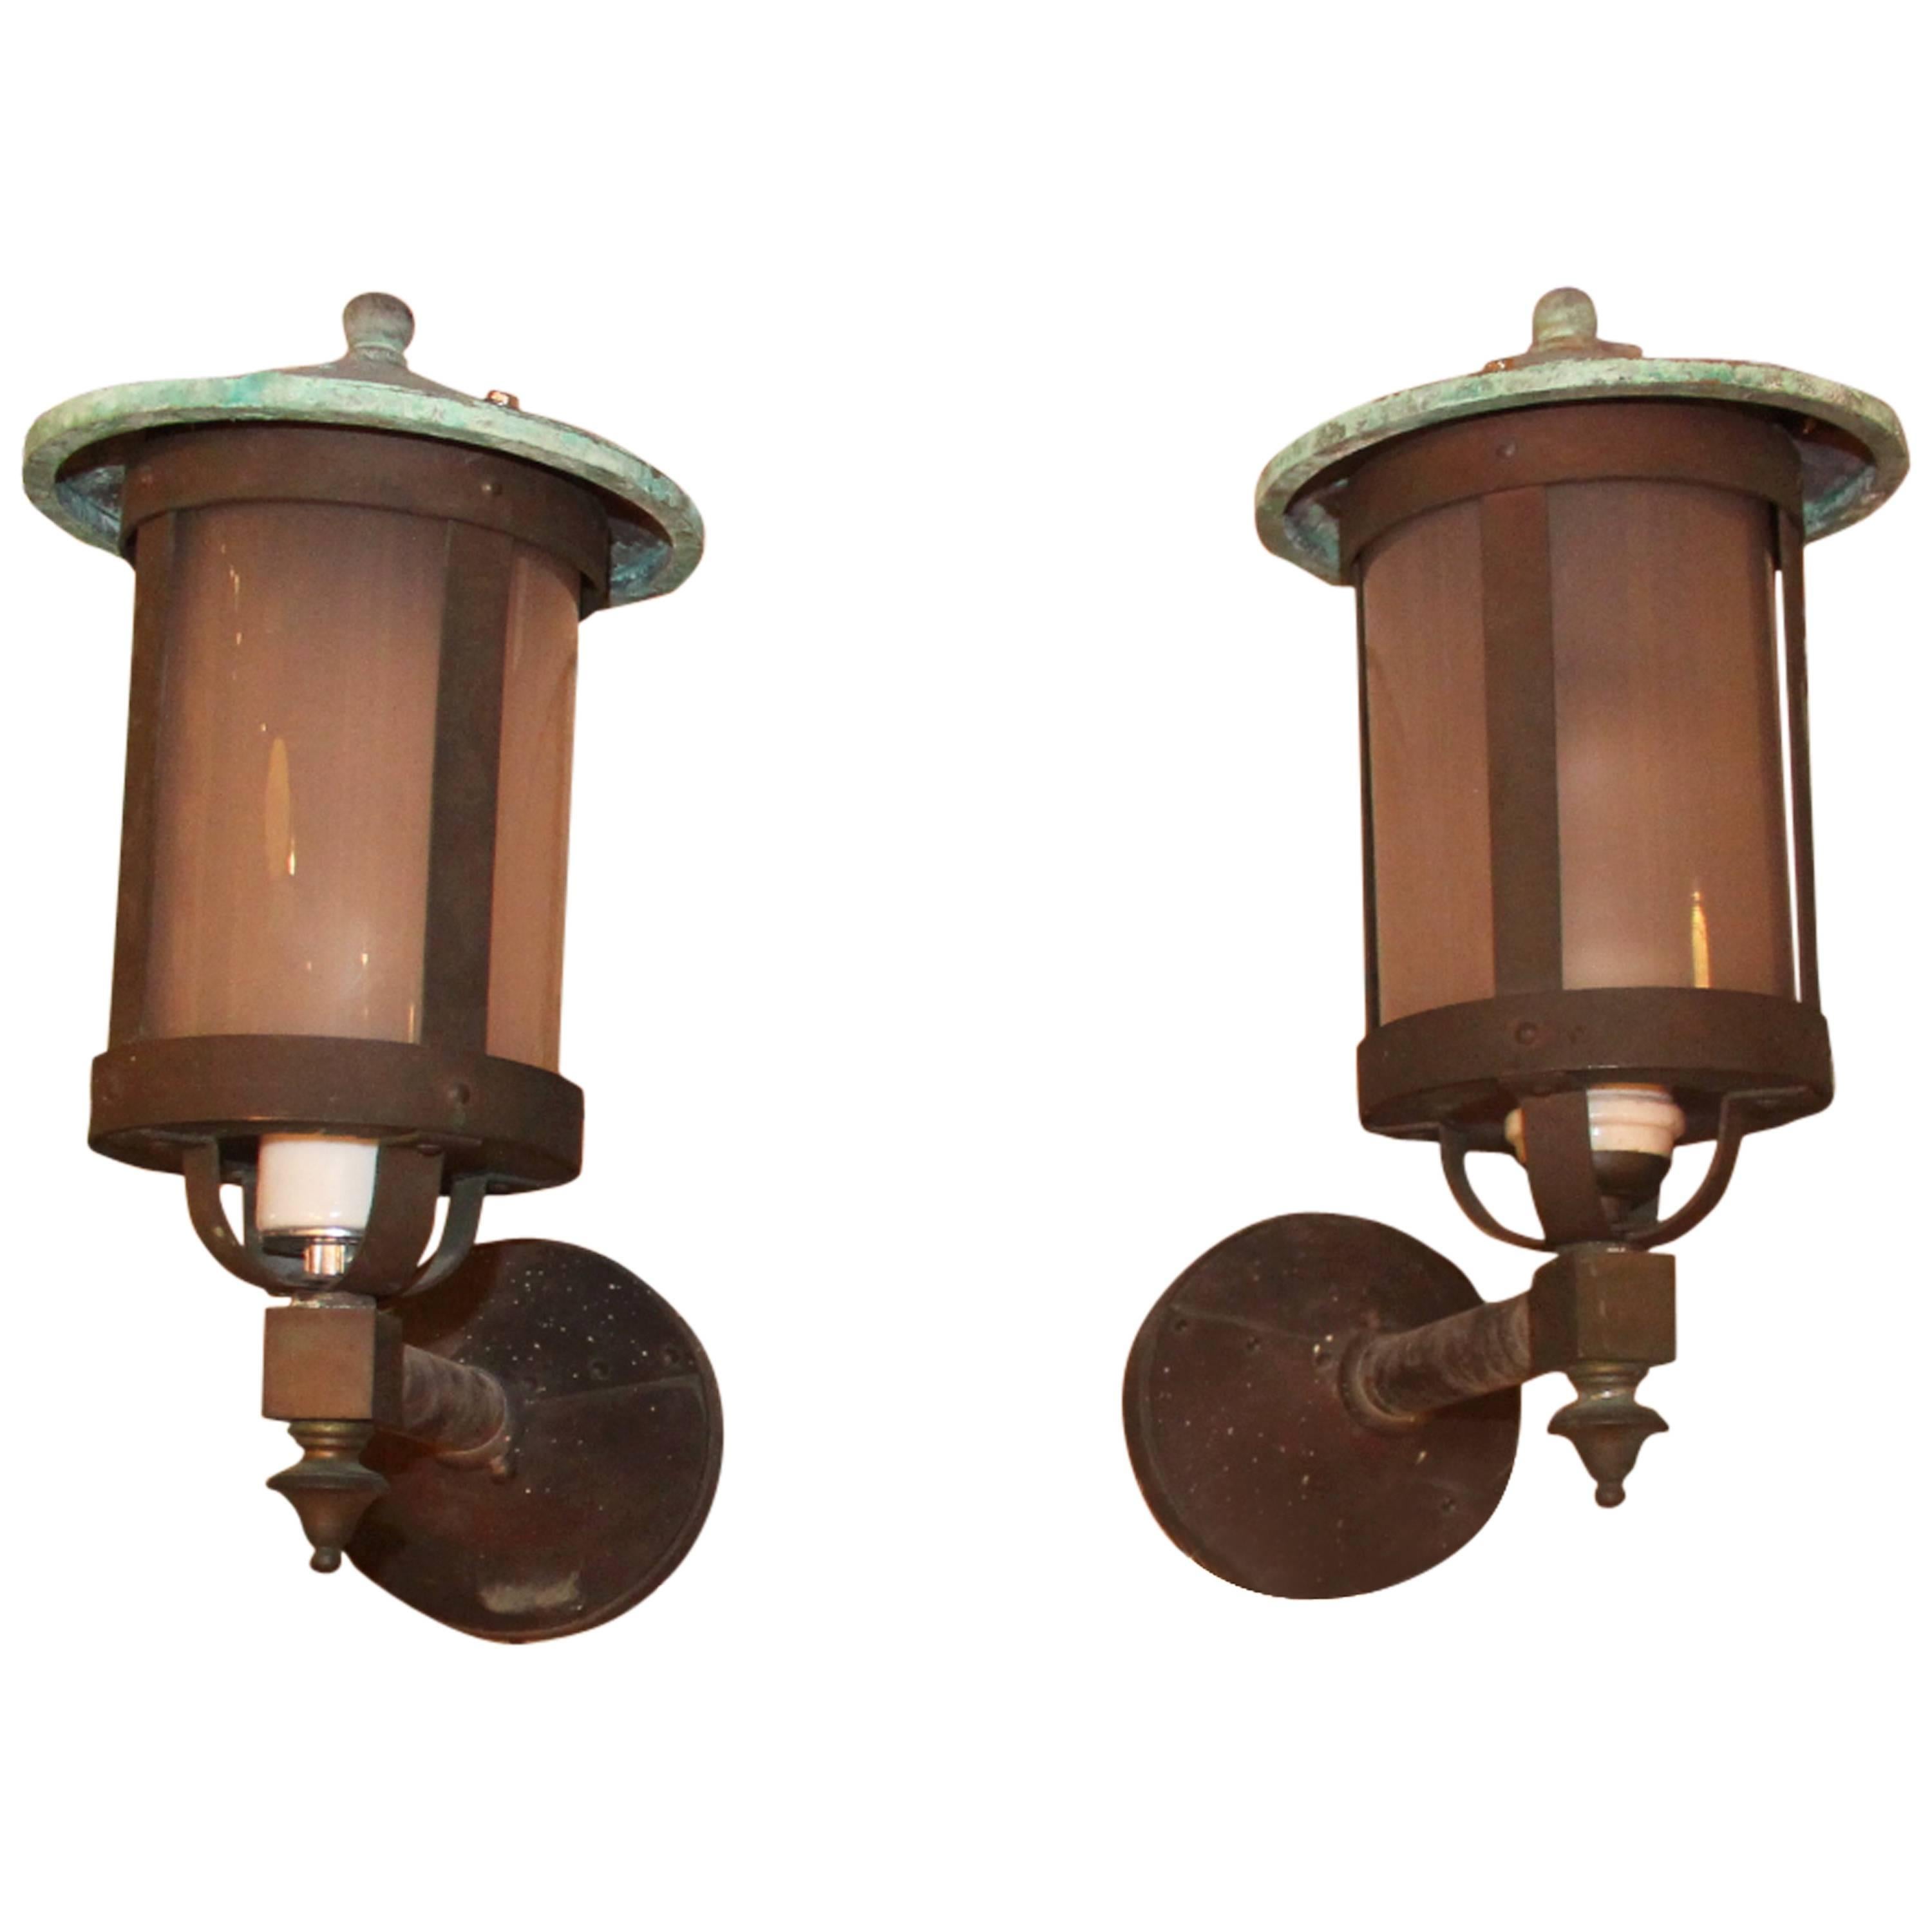 1930s Pair of Signed Bradley and Hubbard Black Copper Lantern Exterior Sconces